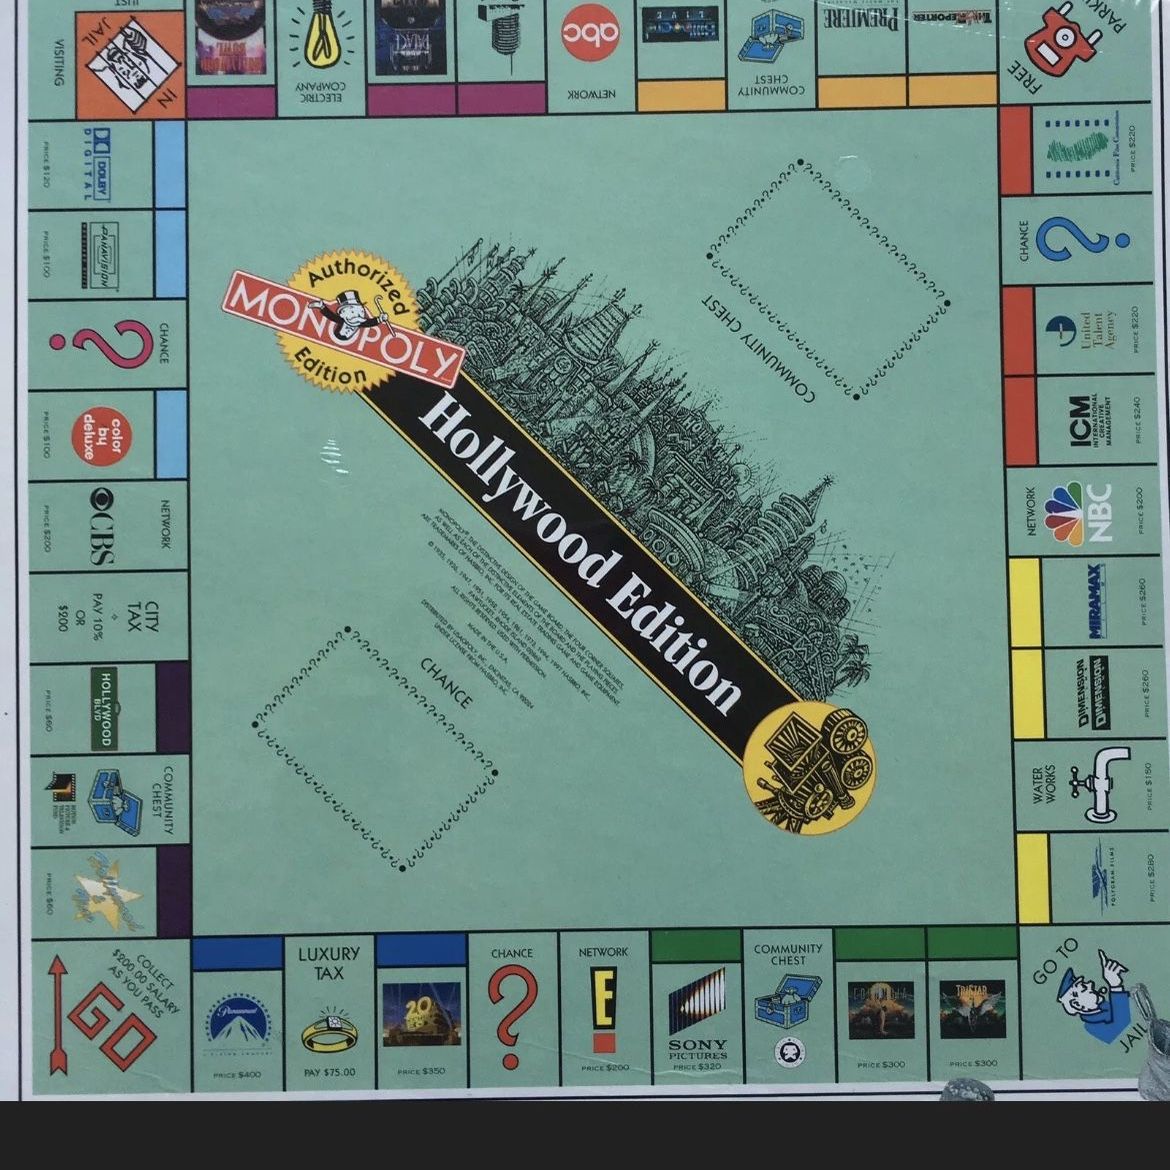 Hollywood Edition Monopoly